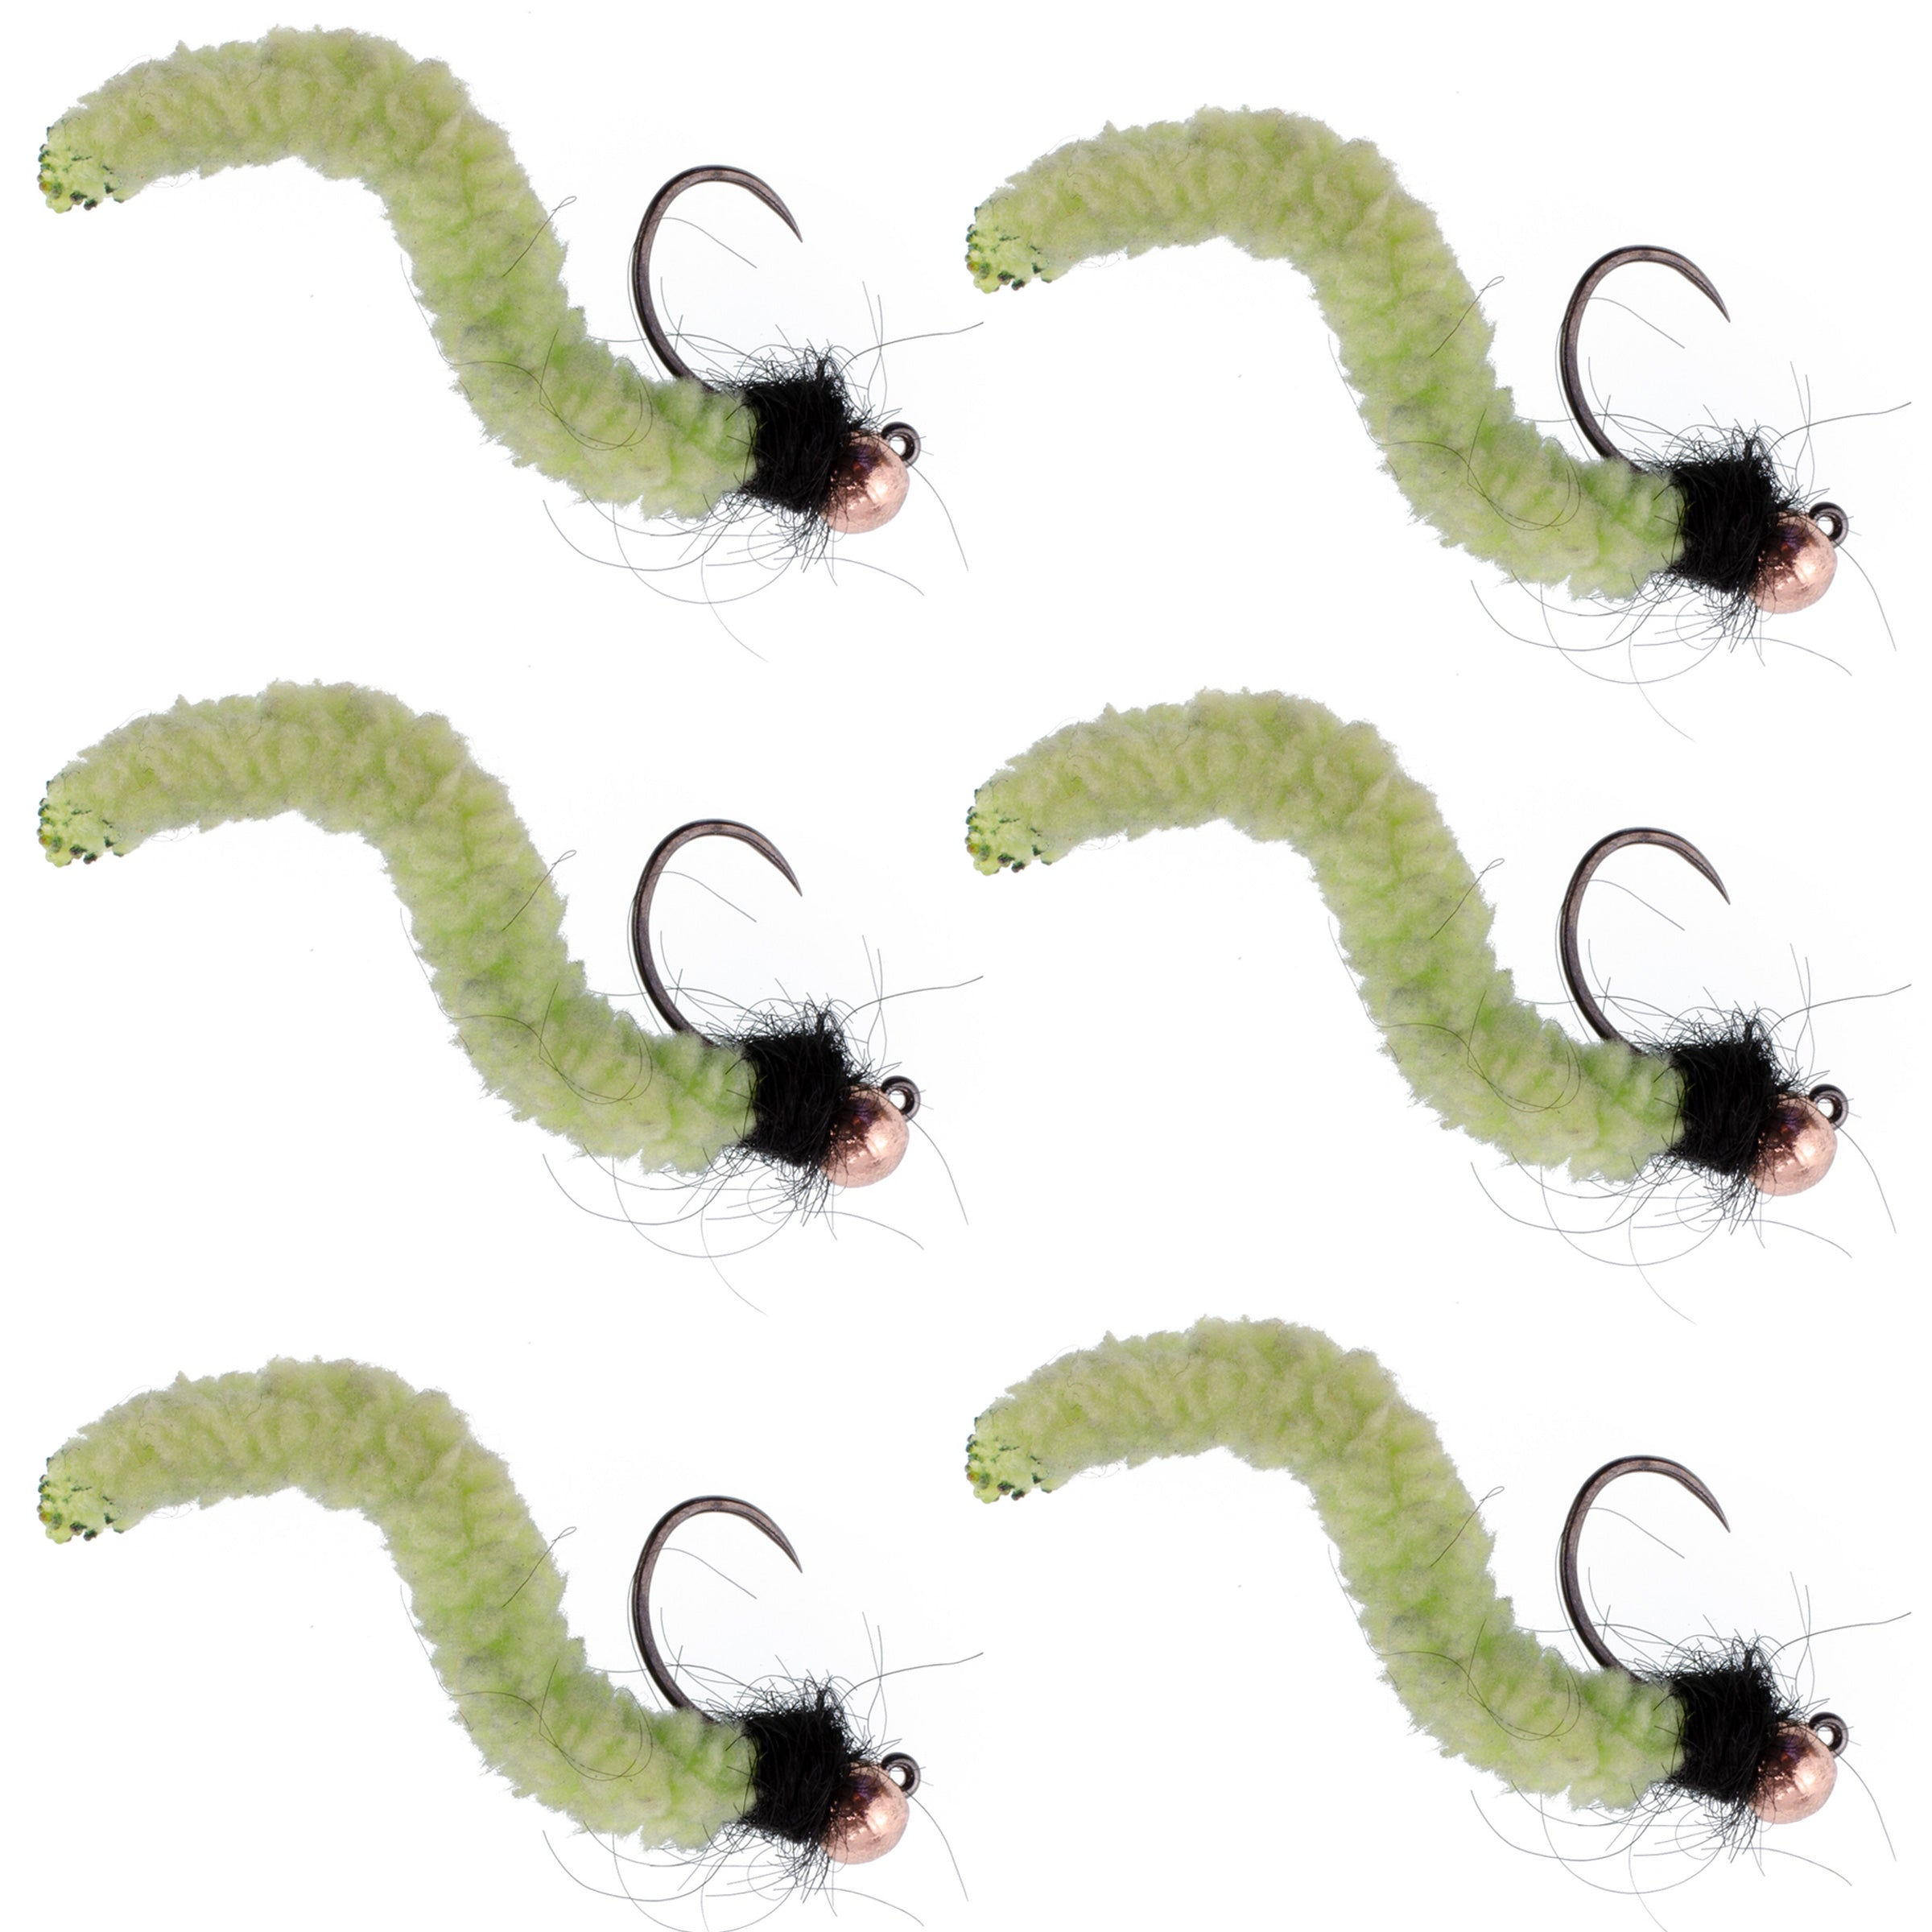 Tungsten Bead White Mop Fly Tactical Jig Czech Euro Nymph Barbless Fly